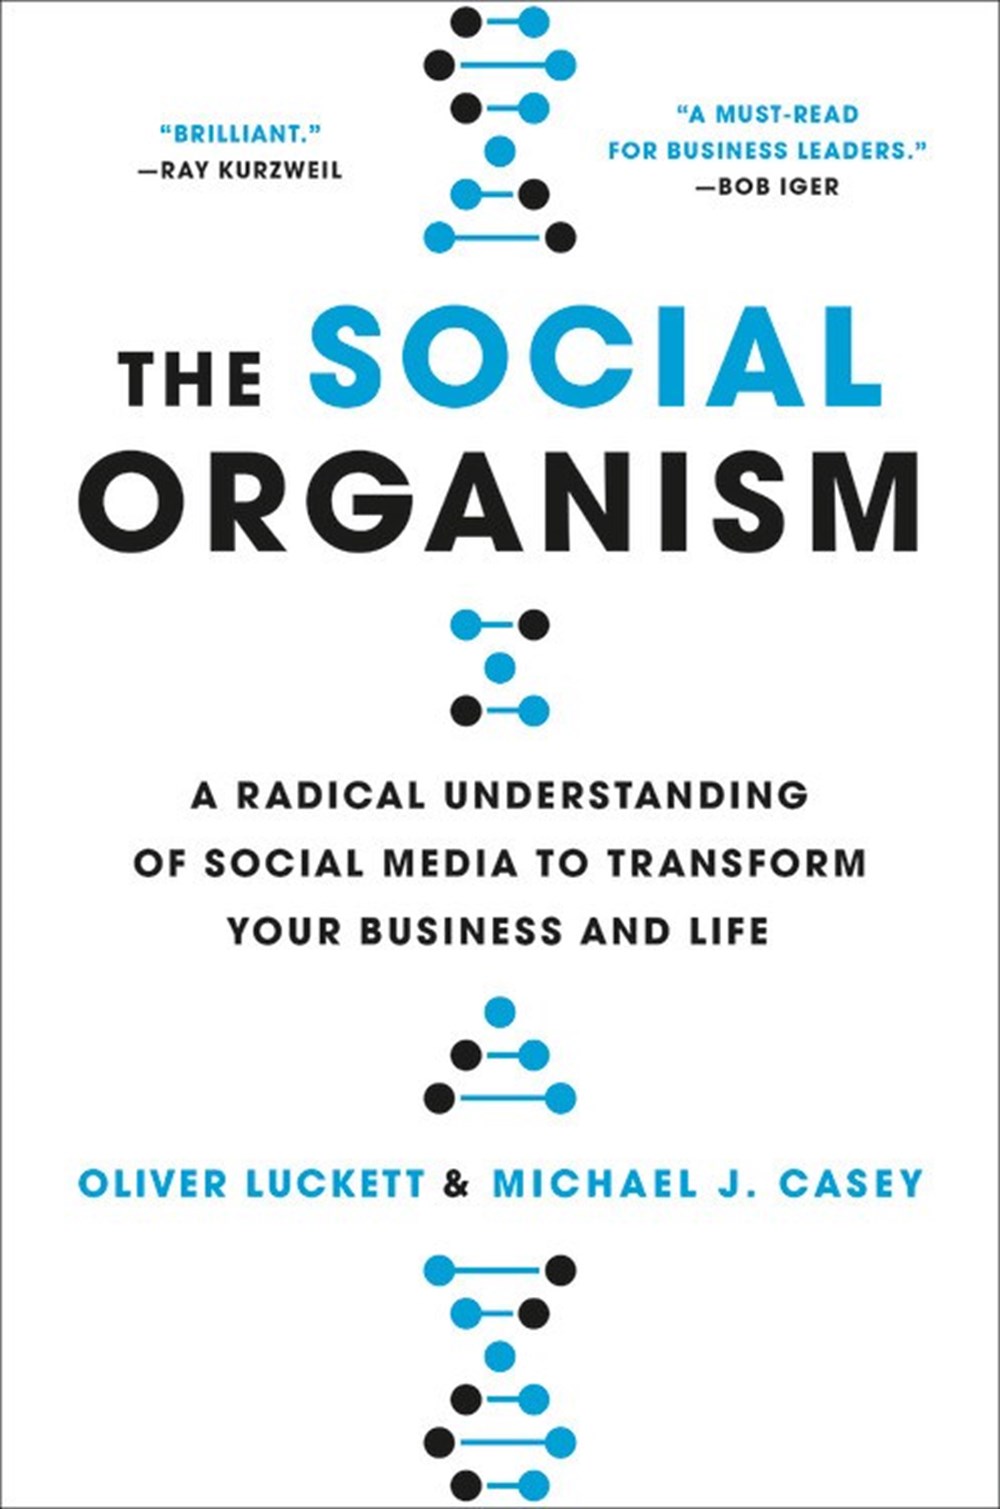 Social Organism: A Radical Understanding of Social Media to Transform Your Business and Life